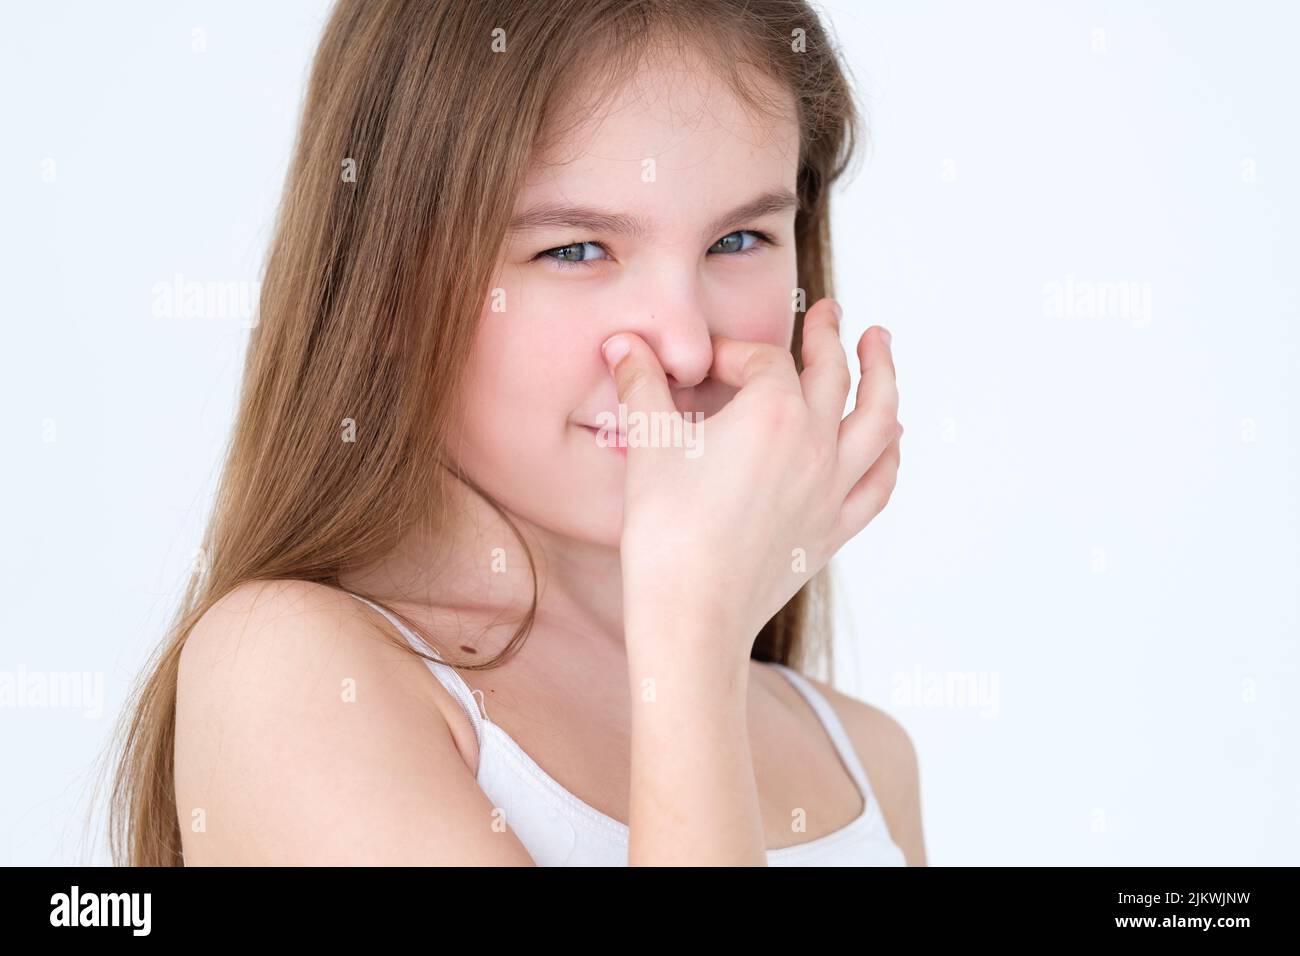 bad foul smell stinky child cover nose expression Stock Photo